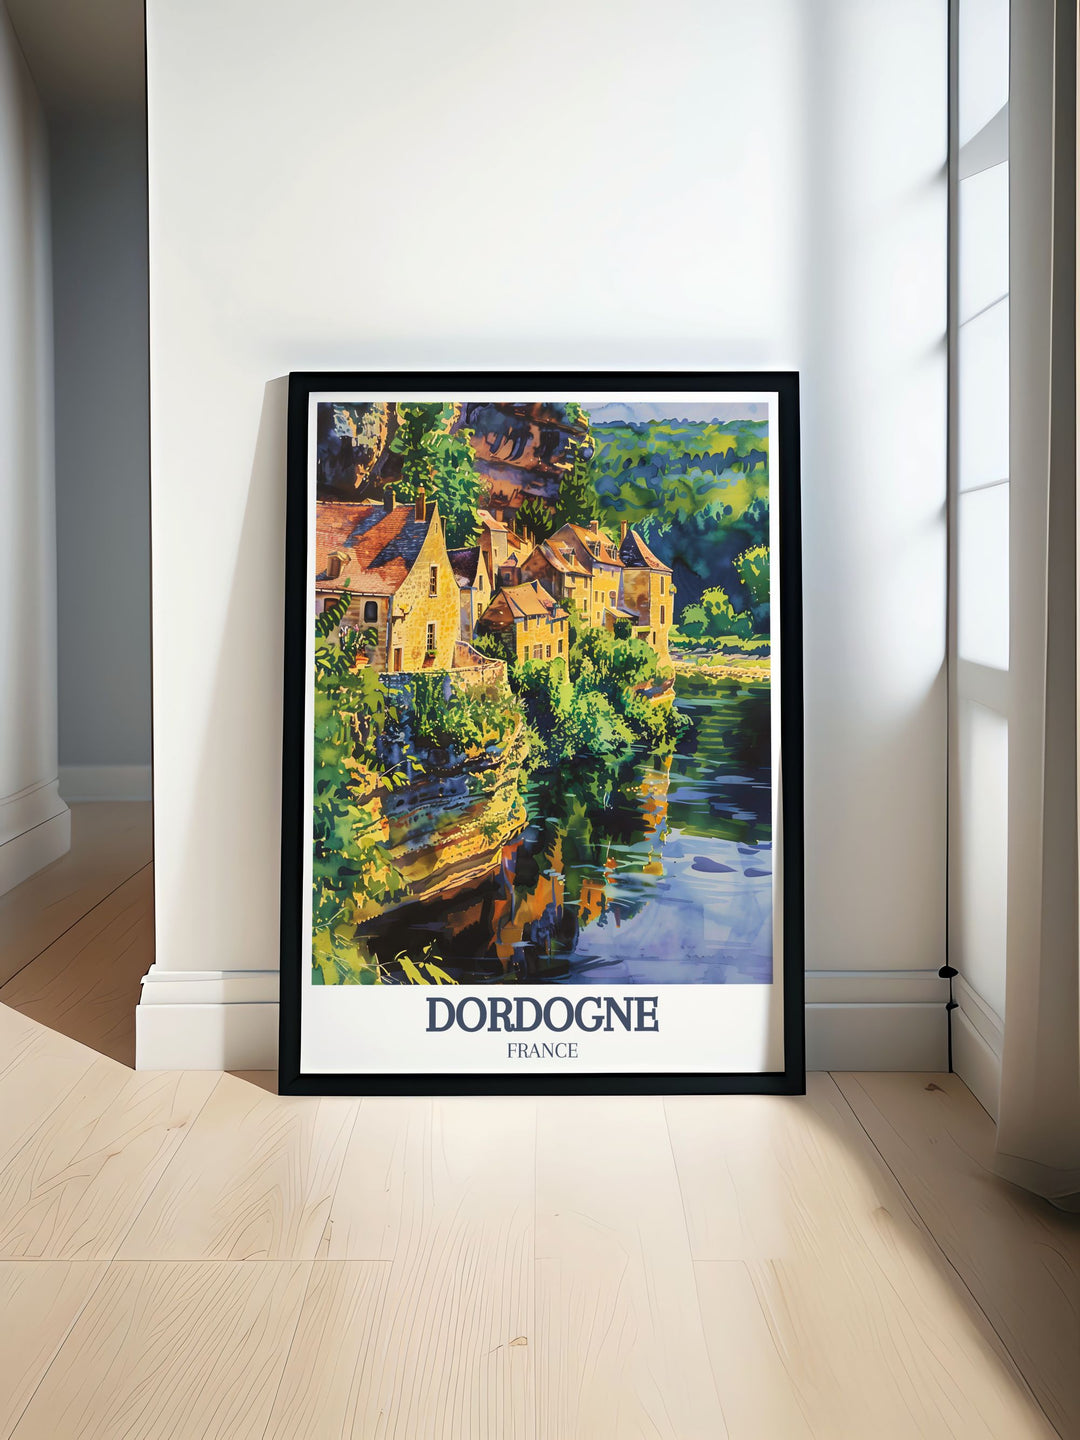 Beautiful digital illustration of Dordogne River and La Roque Gageac capturing the picturesque landscape and charm of this French village ideal for France wall art and home decor